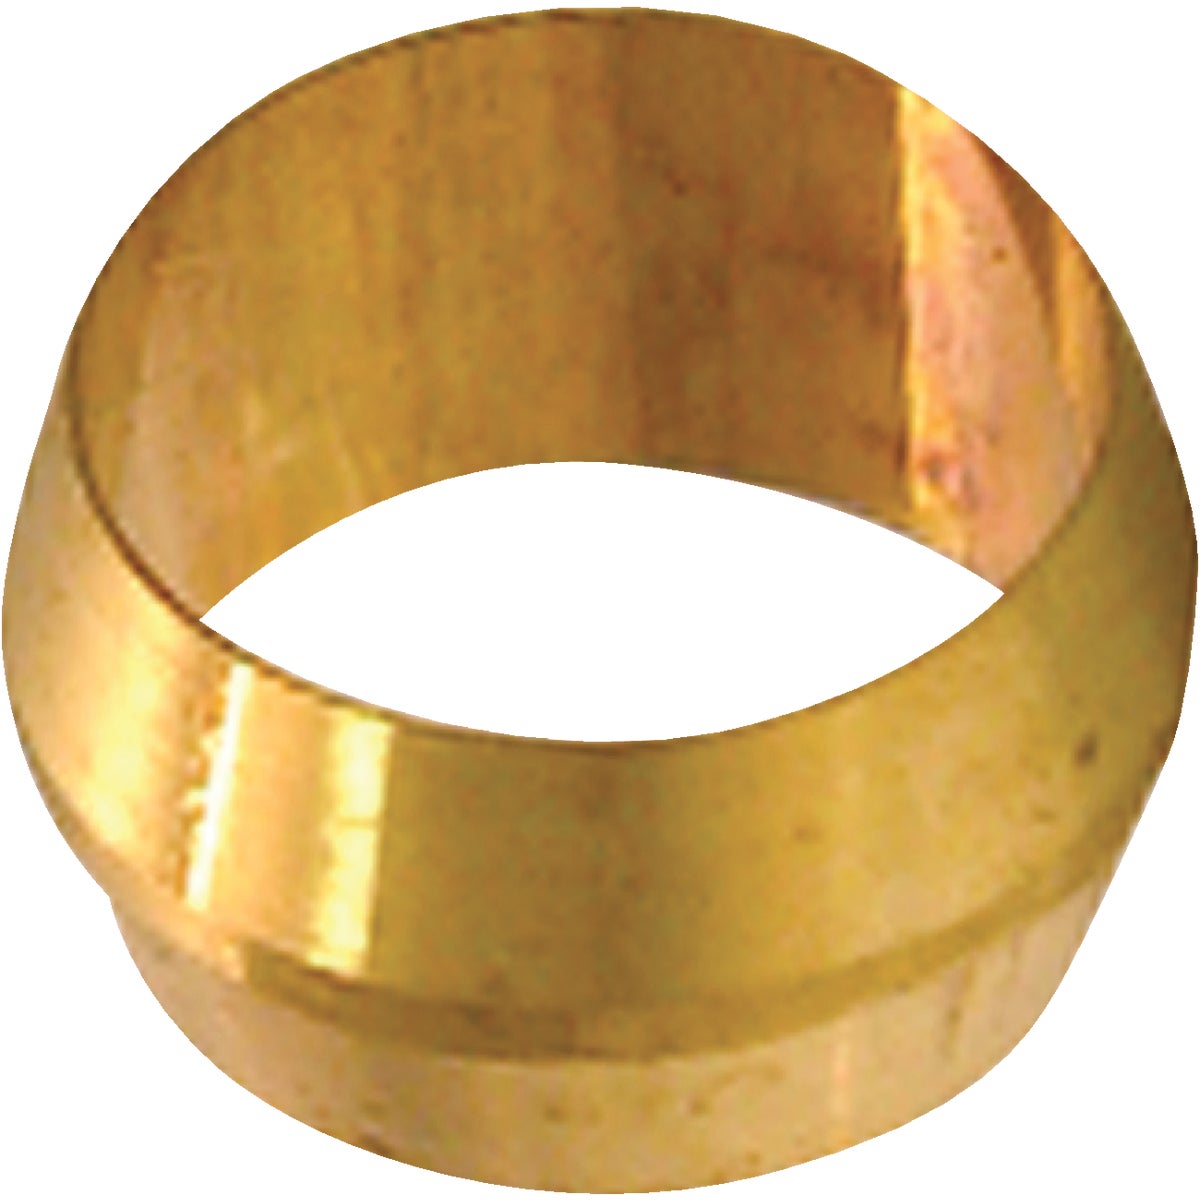 Lasco 1/4 In. Brass Compression Sleeve (2-Pack)